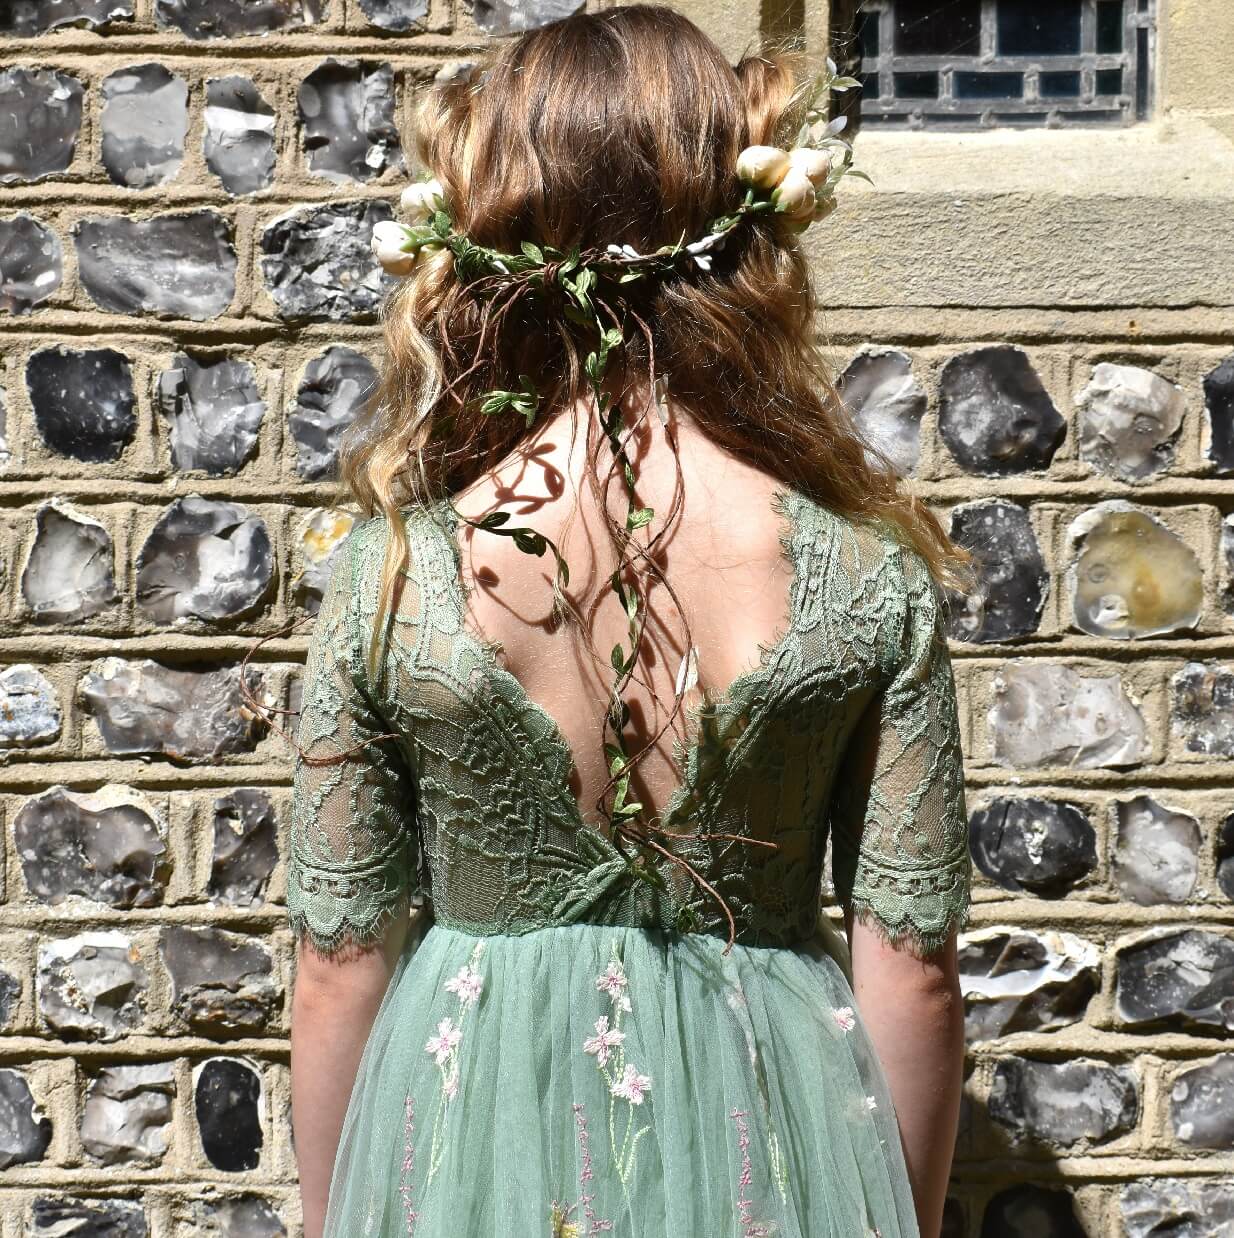 Rear detailing of the dress